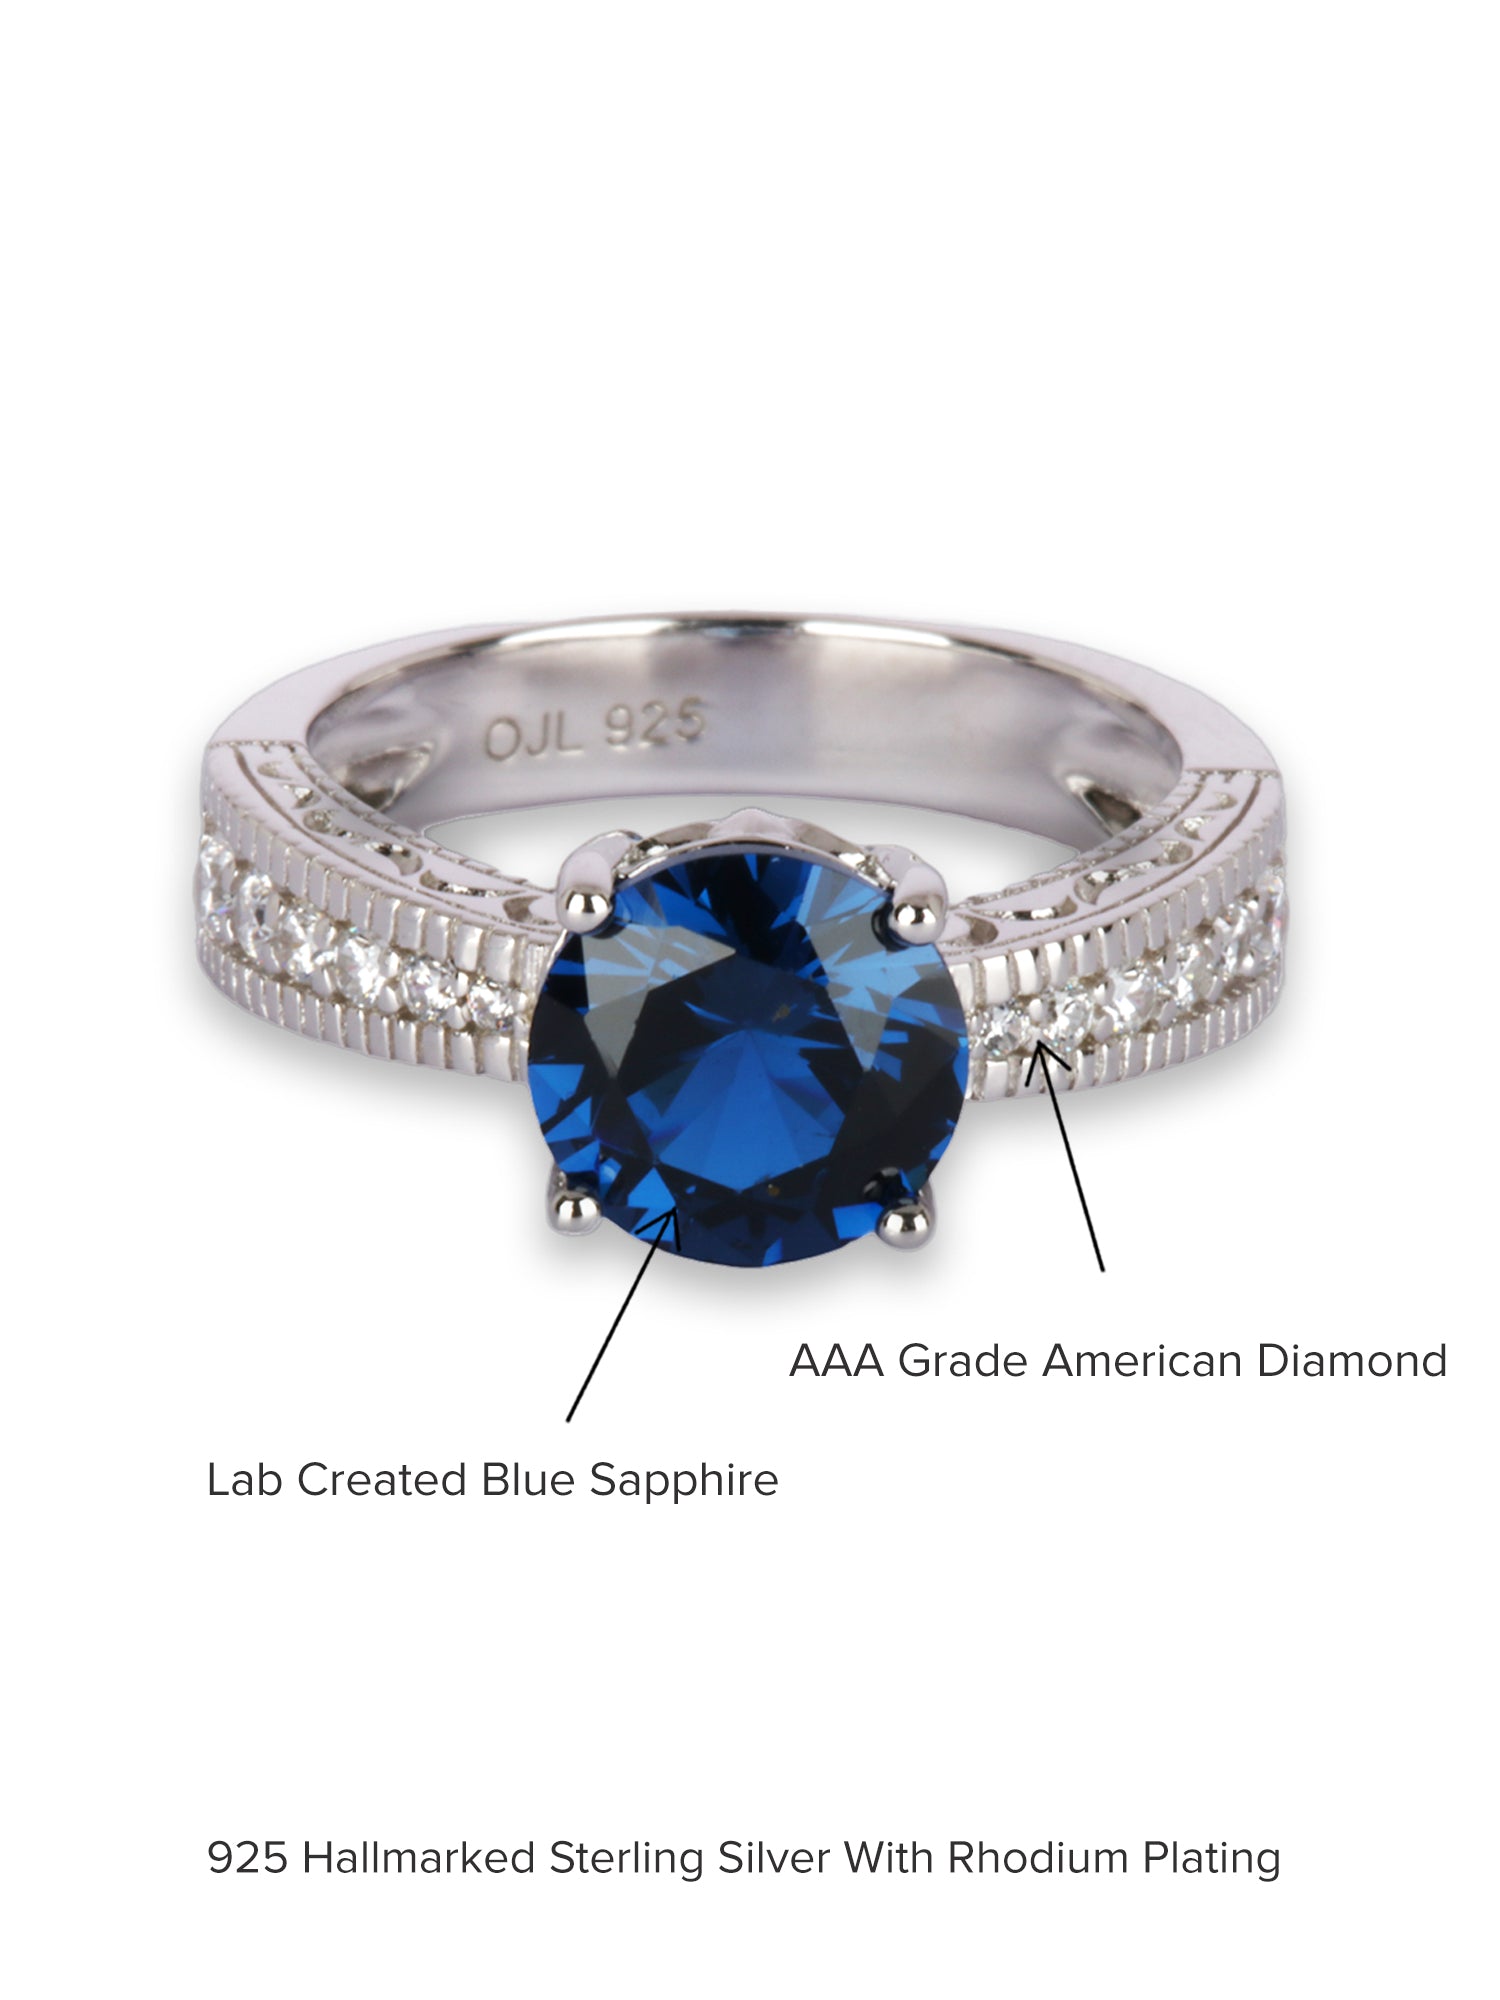 ORNATE JEWELS BLUE SAPPHIRE SILVER SOLITAIRE RING FOR WOMEN-6